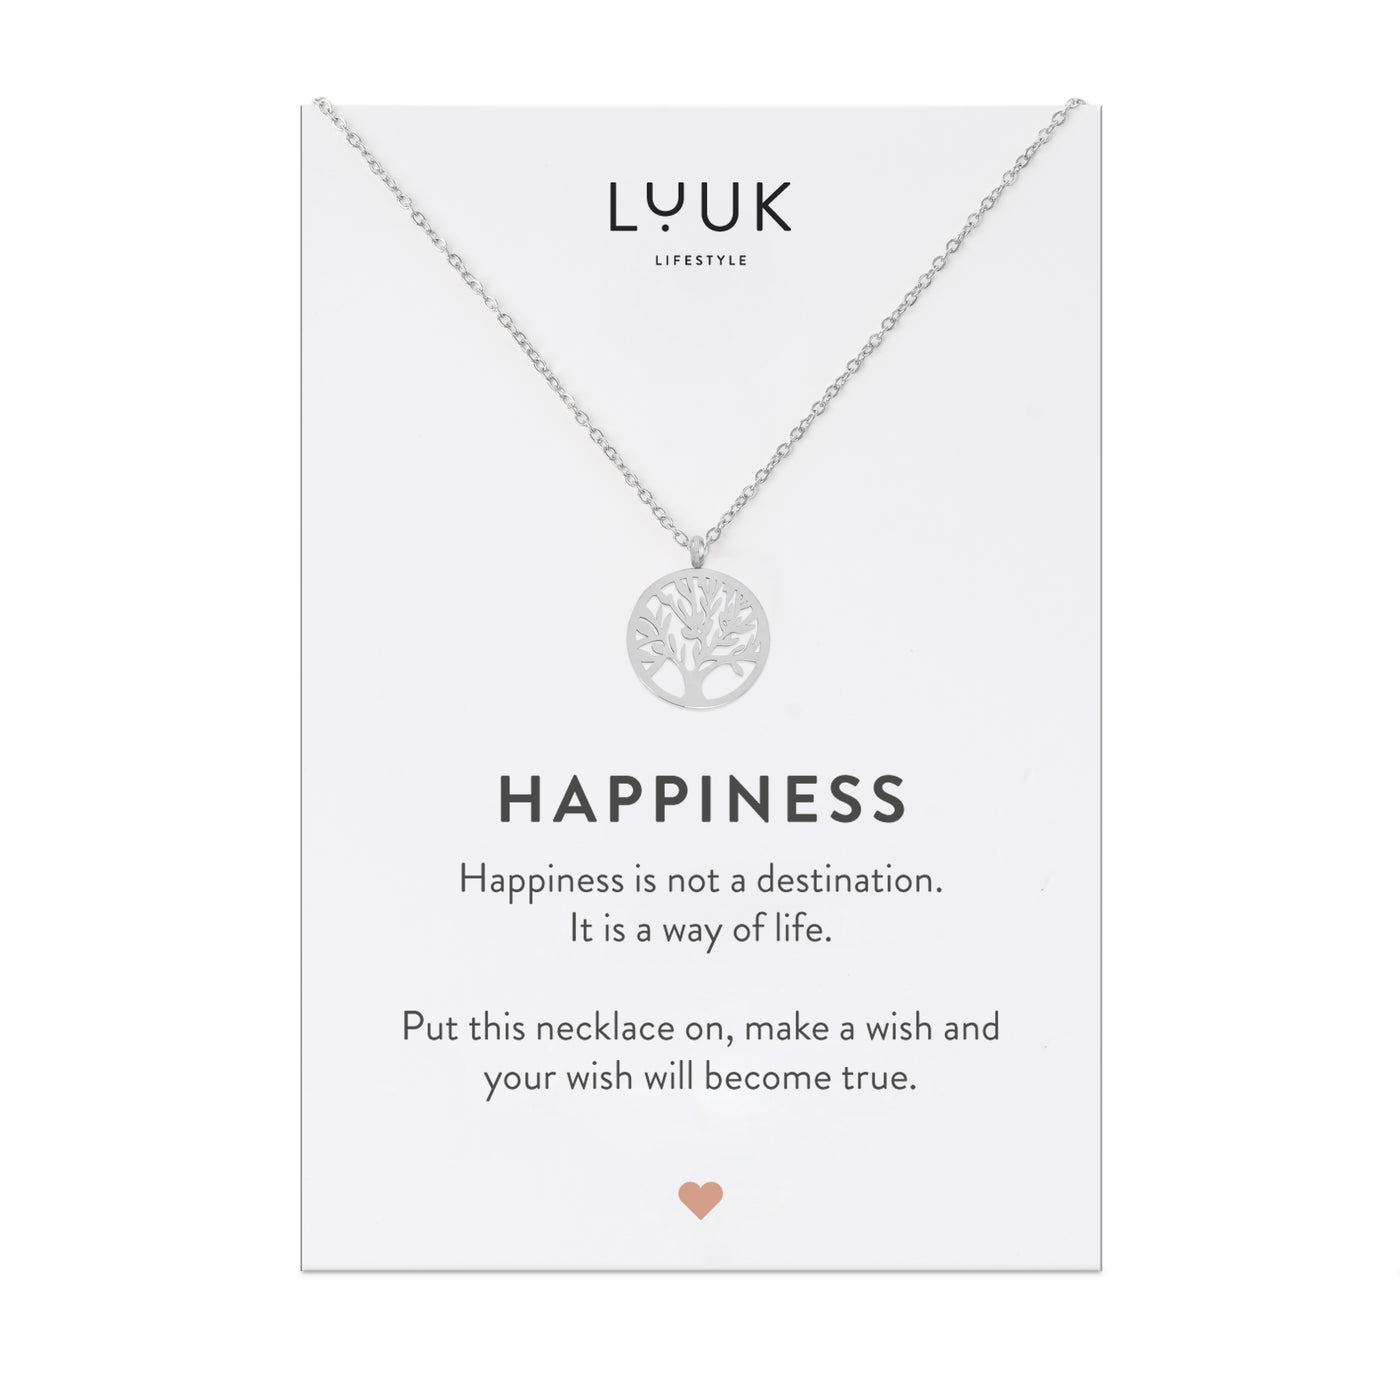 Necklace with Tree of Life pendant and Happiness greeting card